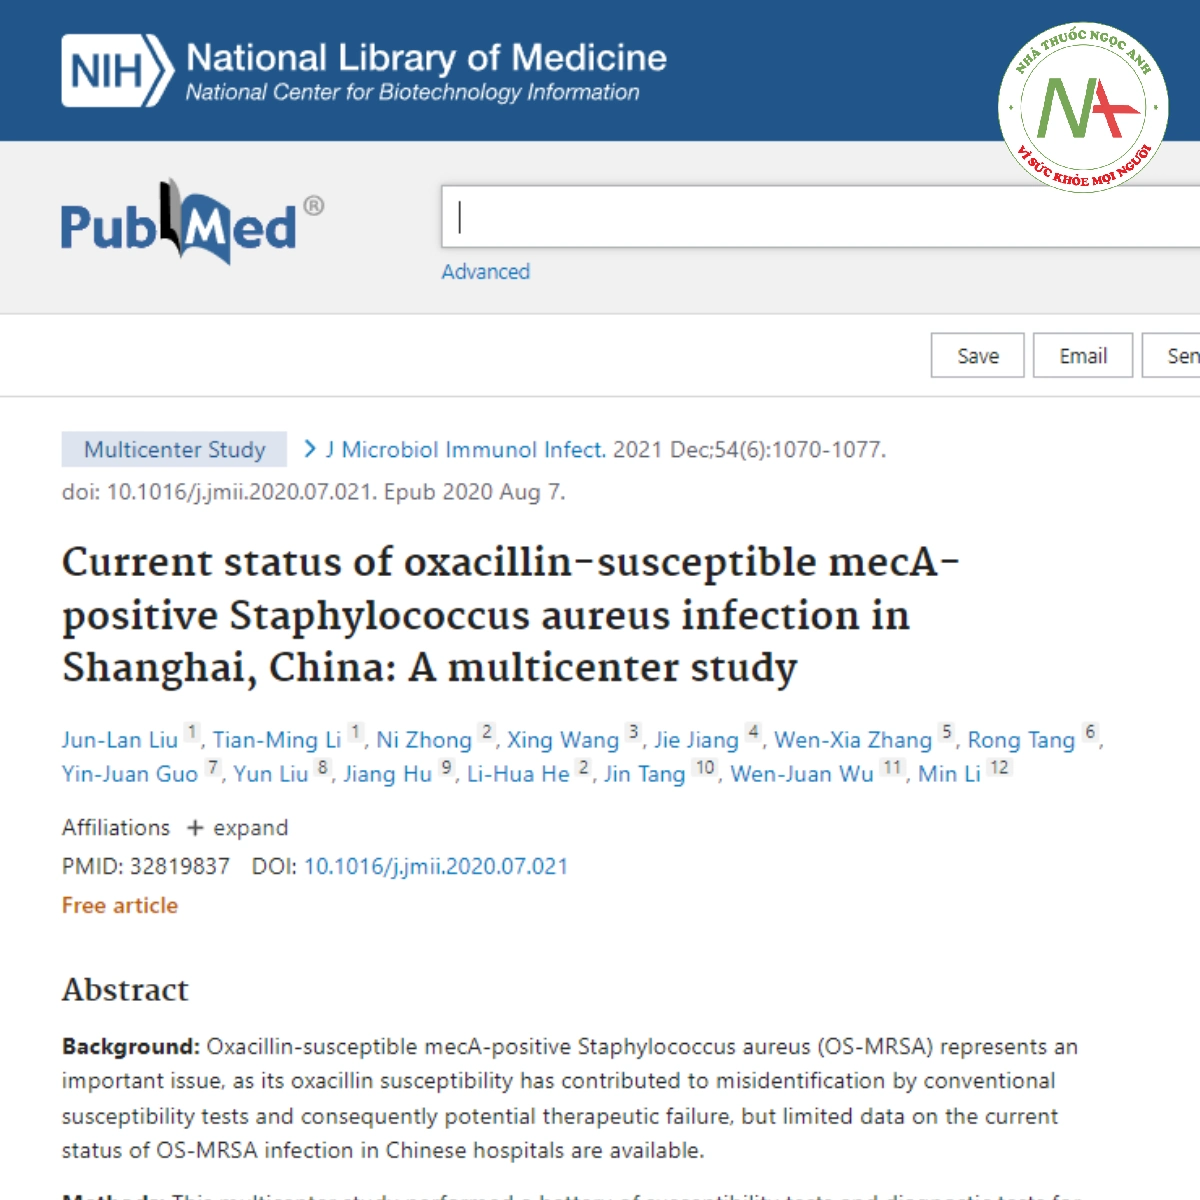 Current status of oxacillin-susceptible mecA-positive Staphylococcus aureus infection in Shanghai, China_ A multicenter study